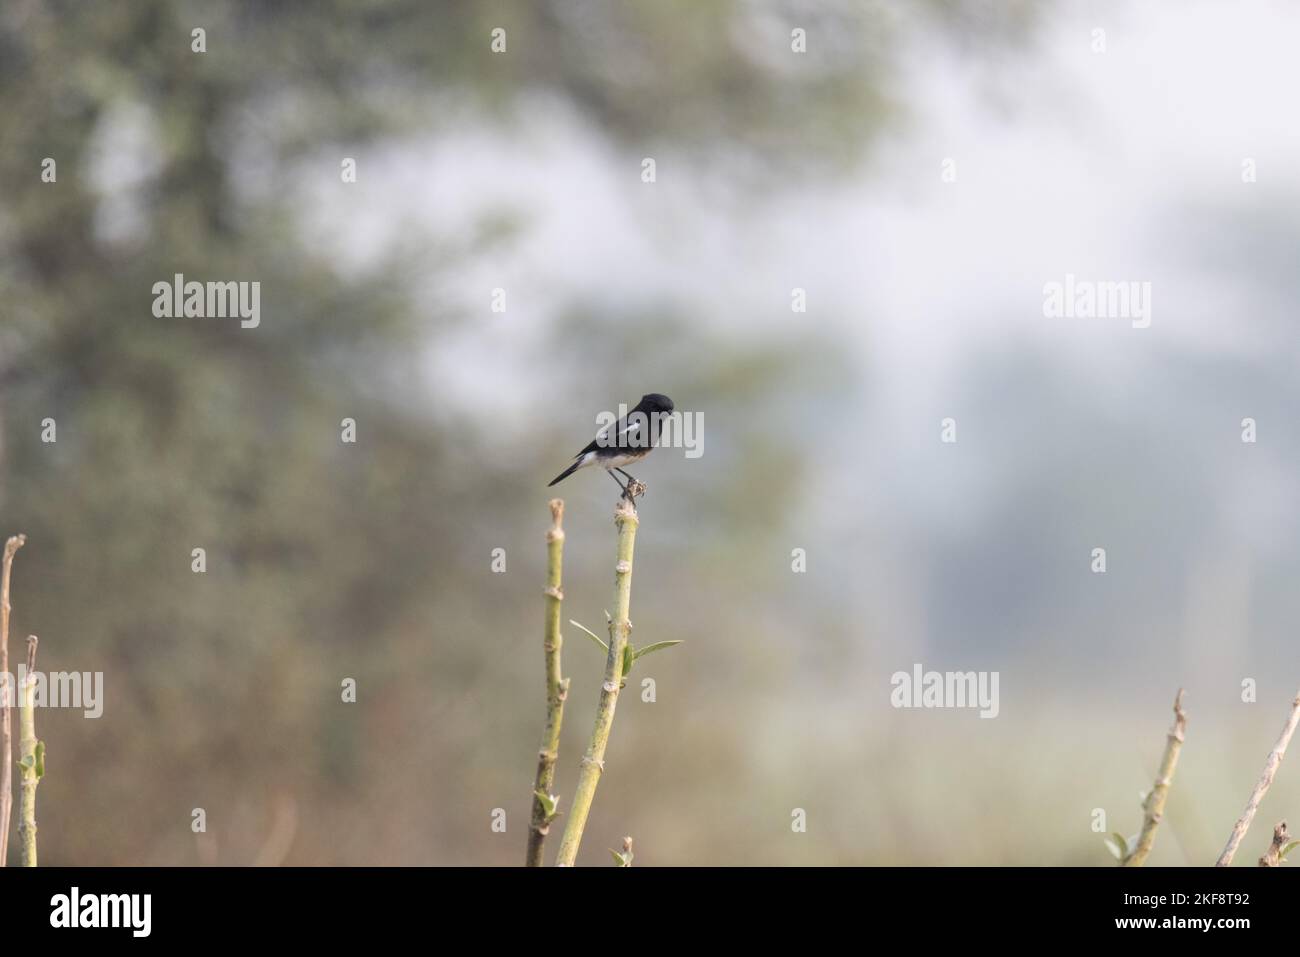 A small Pied bush chat bird perched on Adenia pechuelii branches against a blurred background Stock Photo